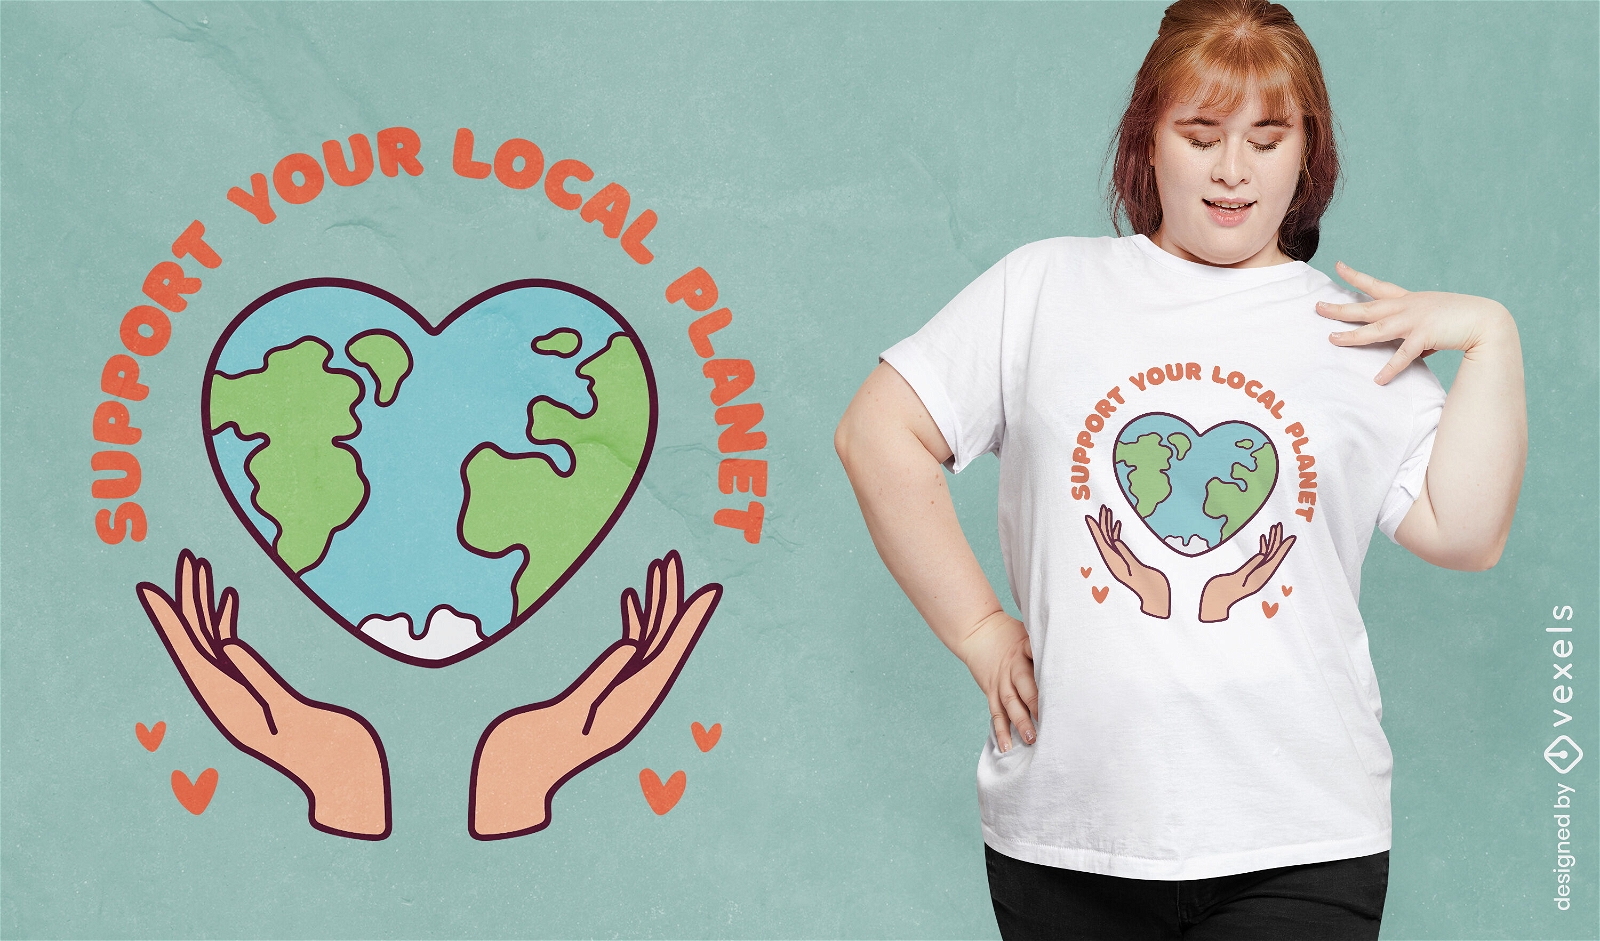 Support your planet t-shirt design